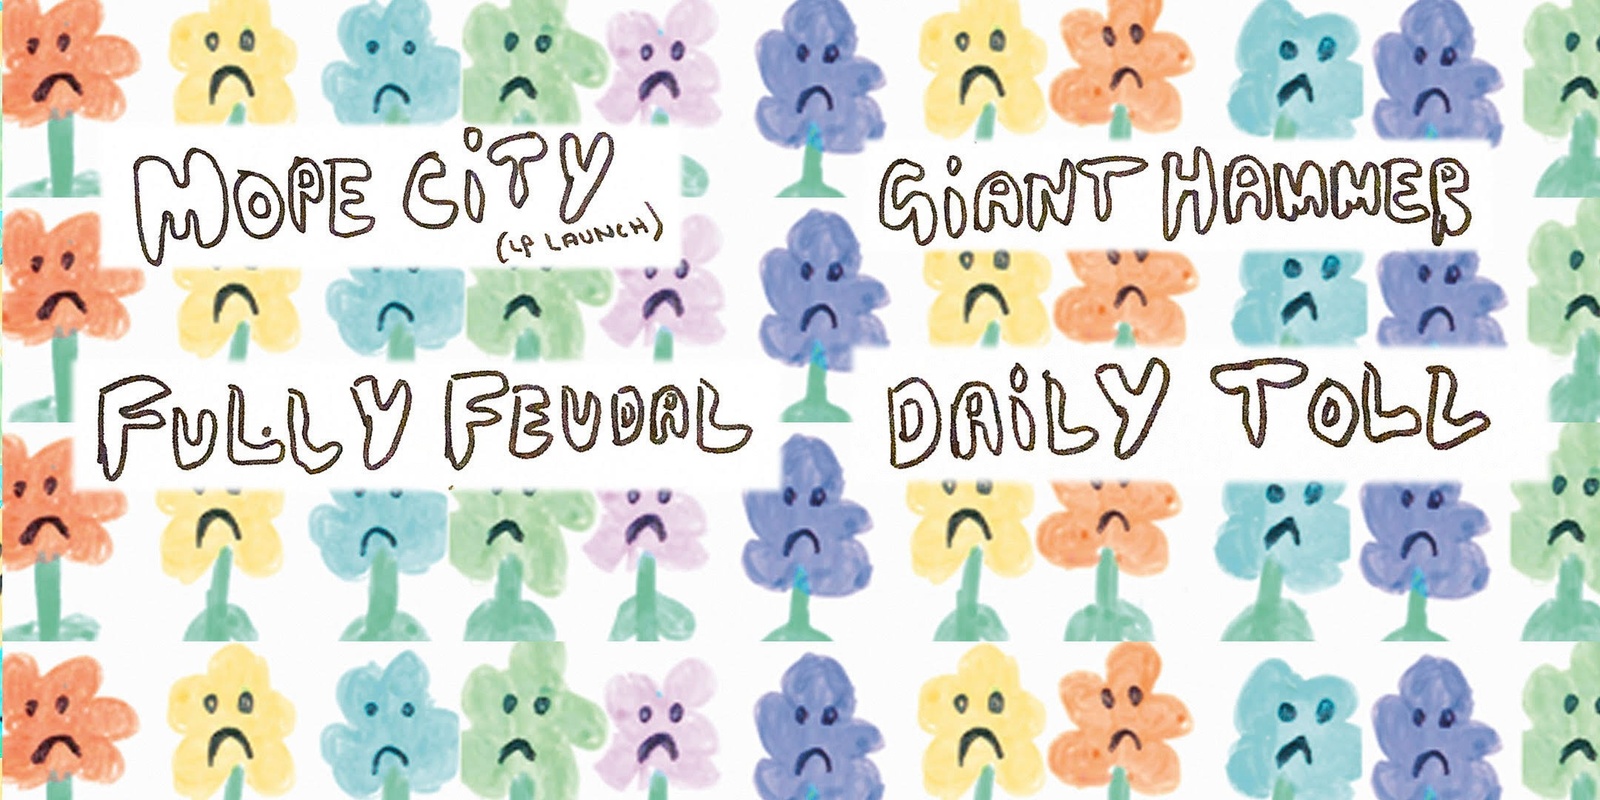 Banner image for MOPE CITY (Album Launch) / FULLY FEUDAL / GIANT HAMMER / DAILY TOLL